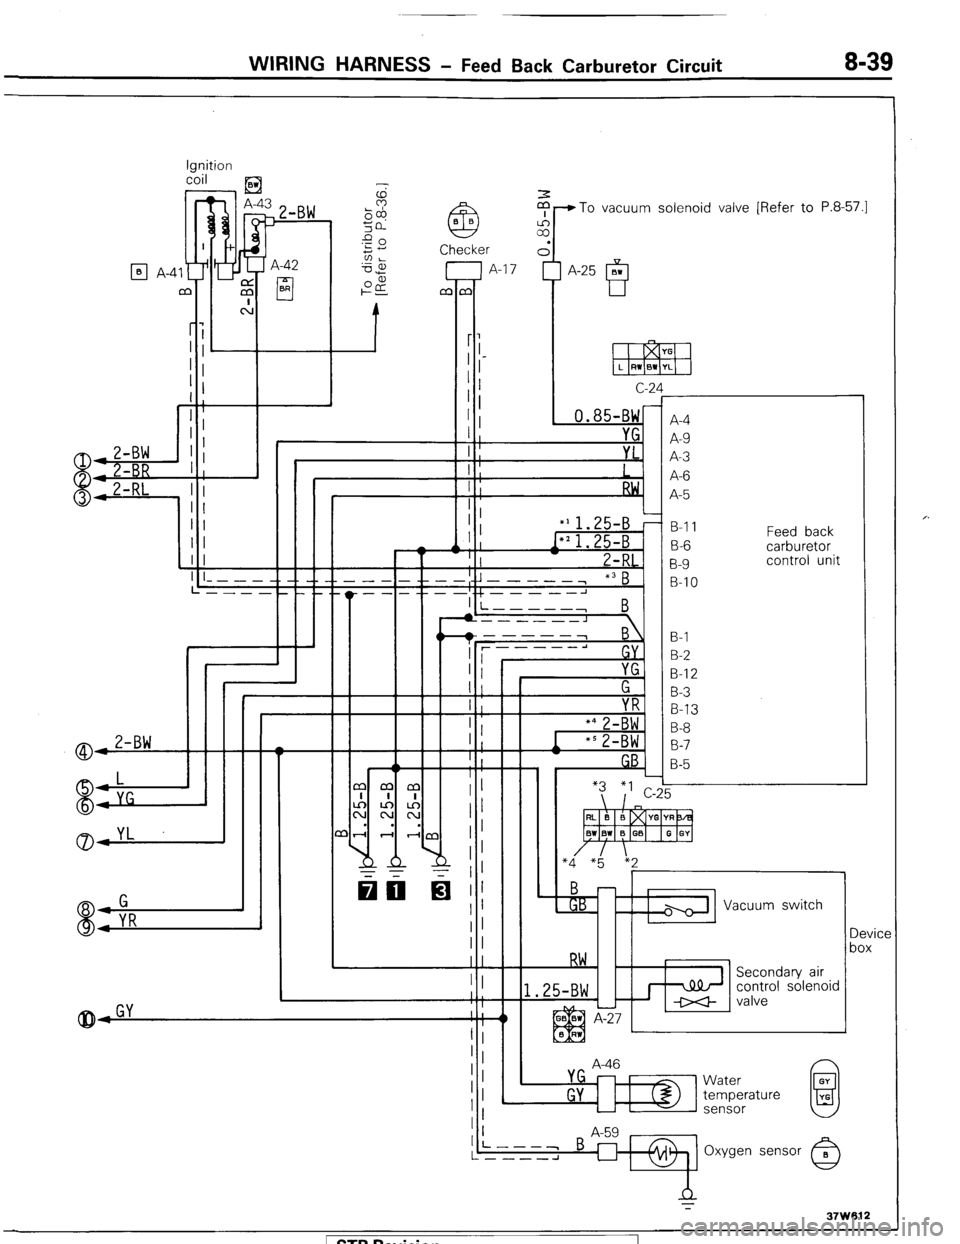 MITSUBISHI MONTERO 1987 1.G Workshop Manual WIRING HARNESS - Feed Back Carburetor Circuit 8-39 
Ignition 
coil 
) _ ,E3 
$-To vacuum solenoid valve [Refer to P.8-57.1 
7  A-42 
cl BR 
q A-4 
c-2 
, 0.85-BW 
I YG 
I ; 
I : YL. 
I 
I ; 
RW, 
I : 